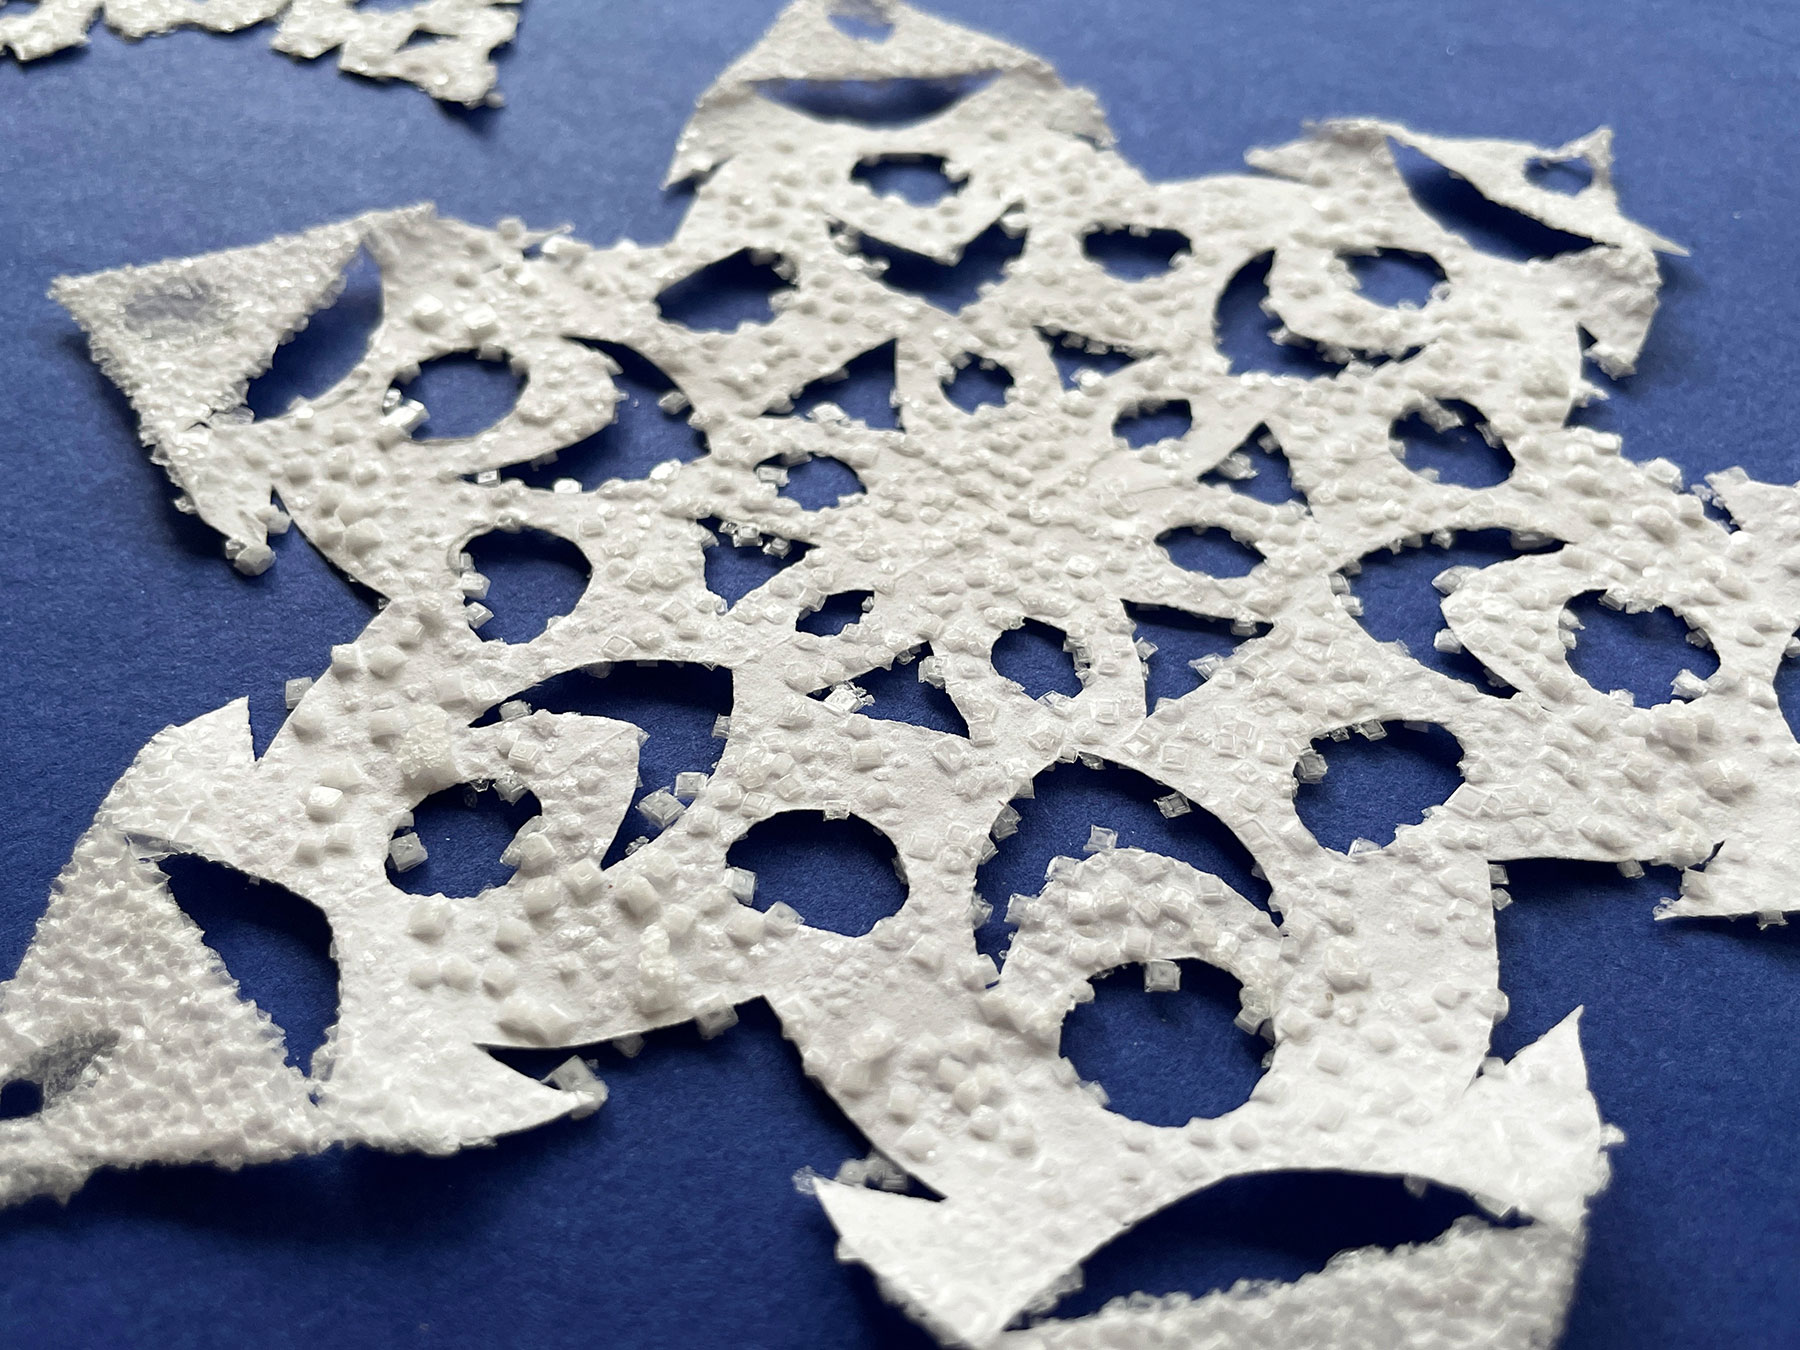 A photo of a paper snowflake covered in salt crystals